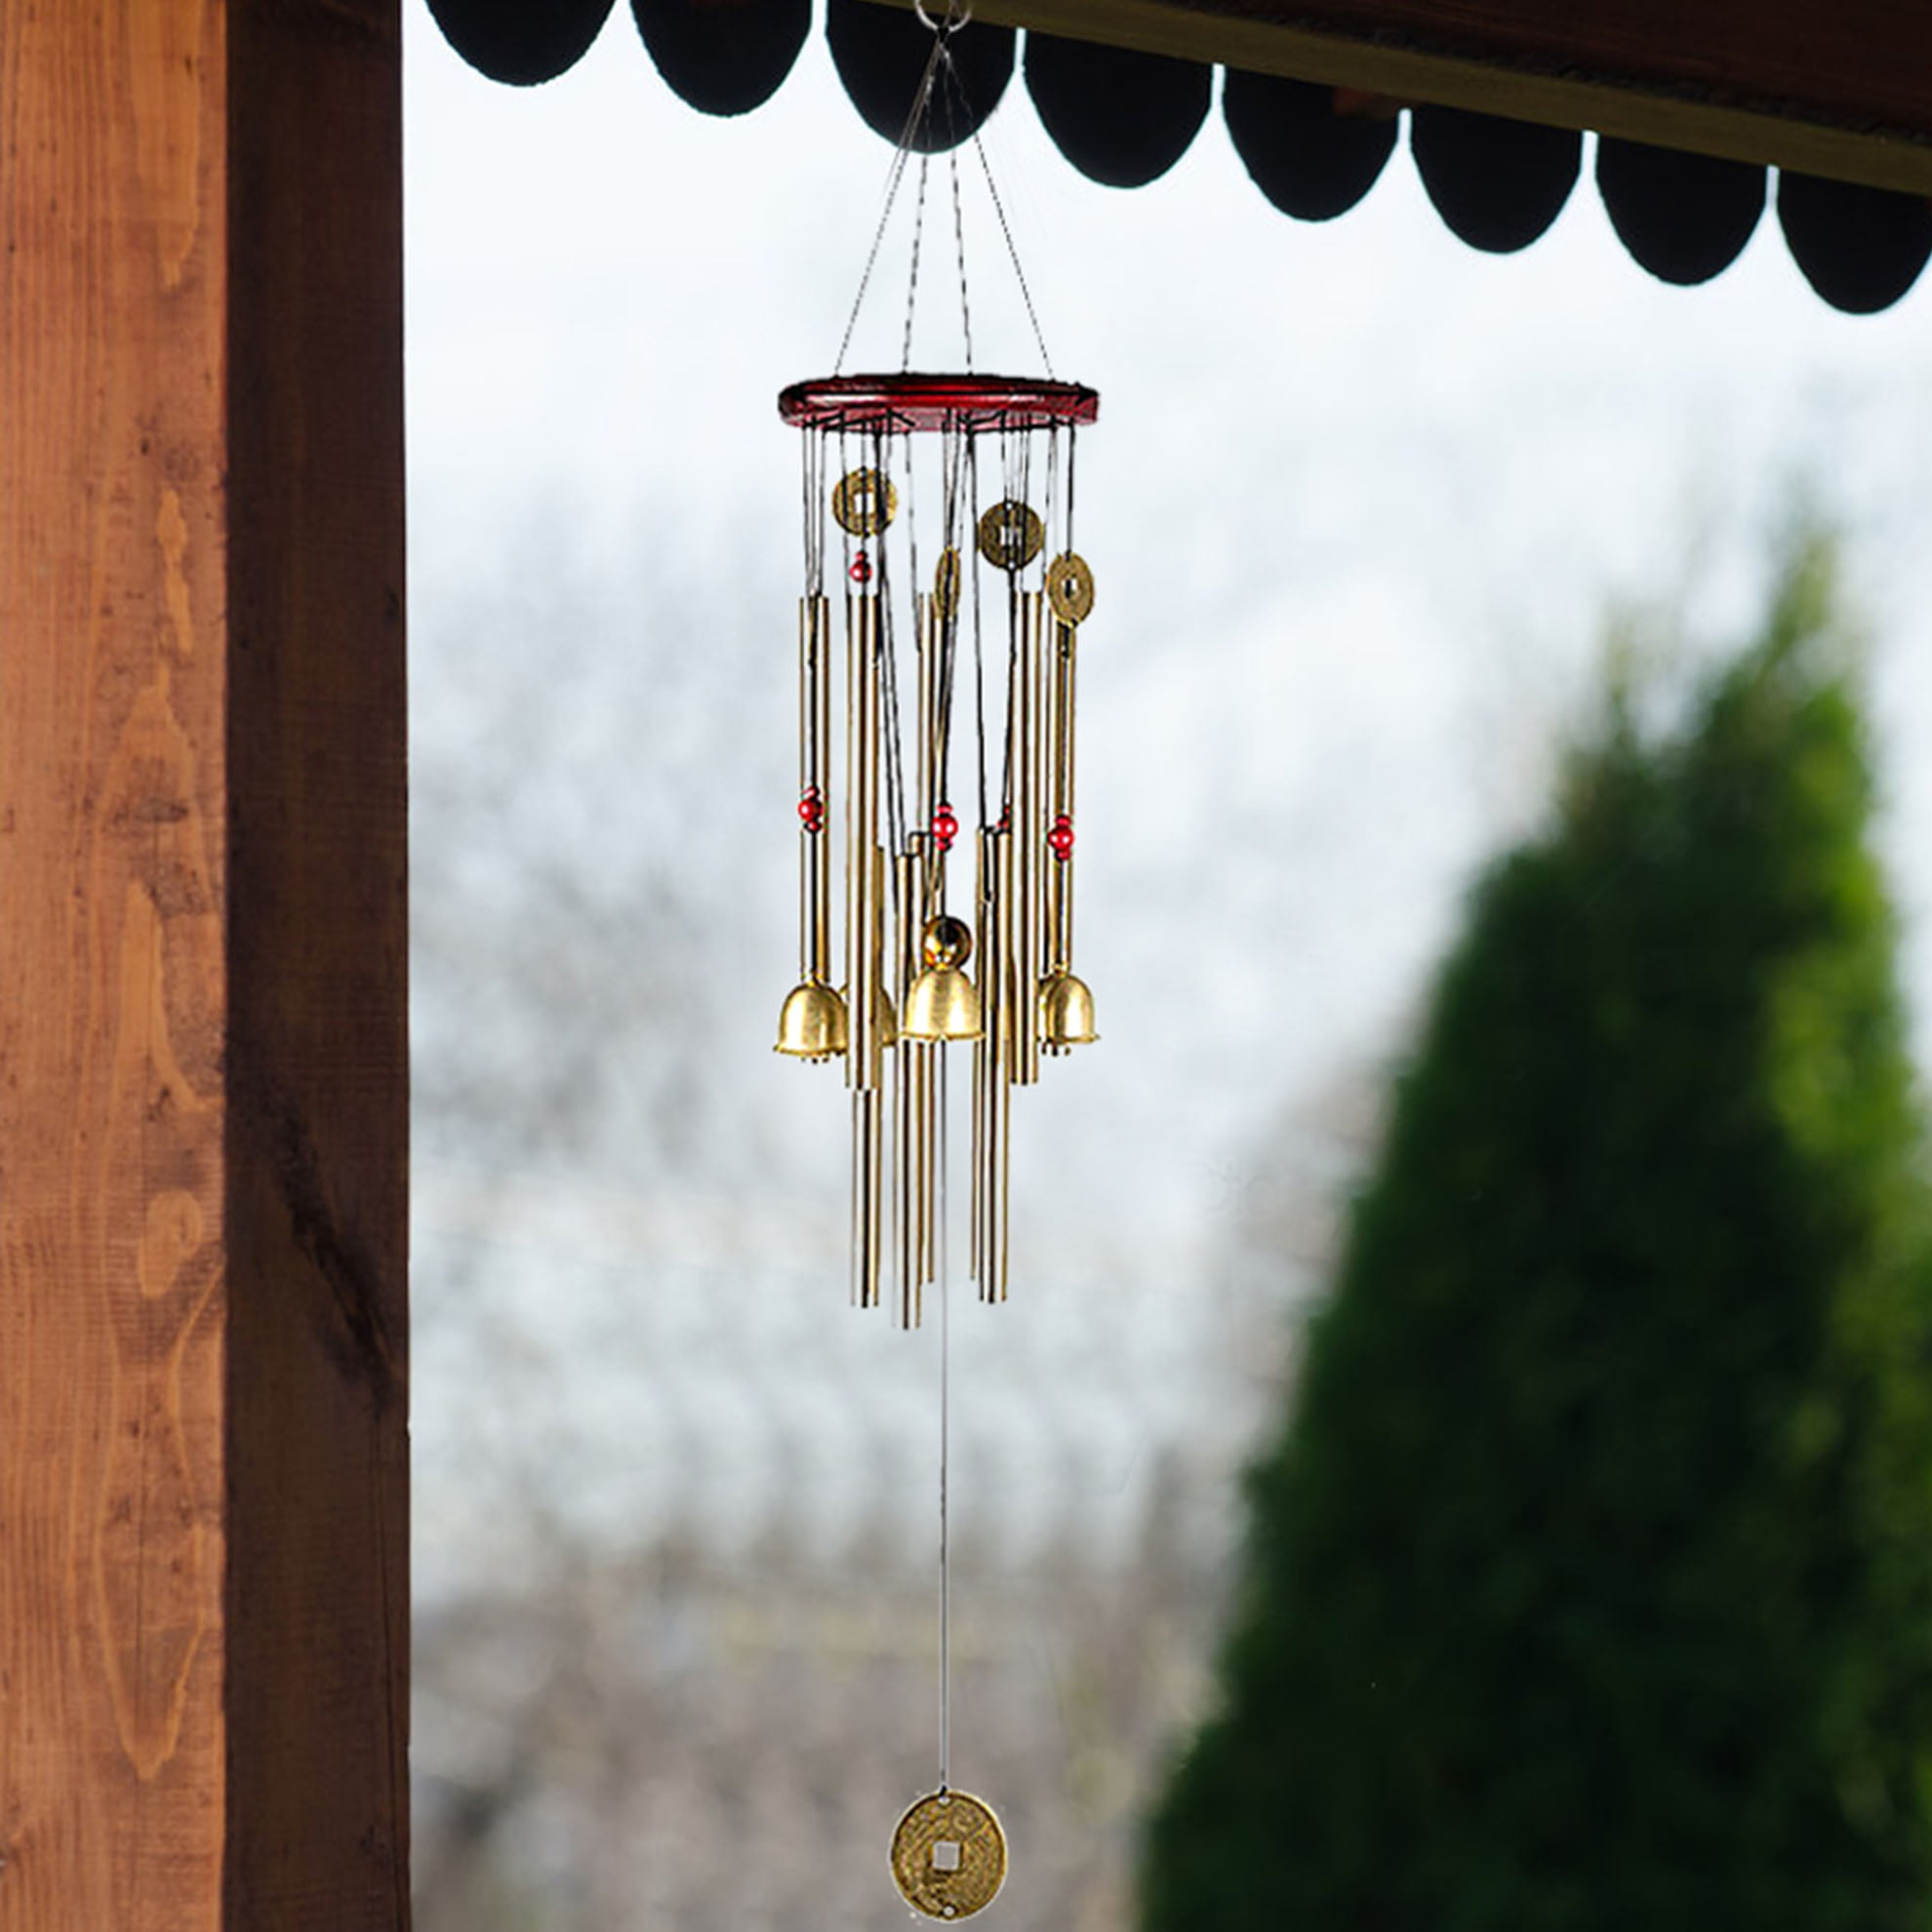 Outdoor Living Window Wind Chimes Yard Garden Bells Chinese Copper Coin 8 Tubes 